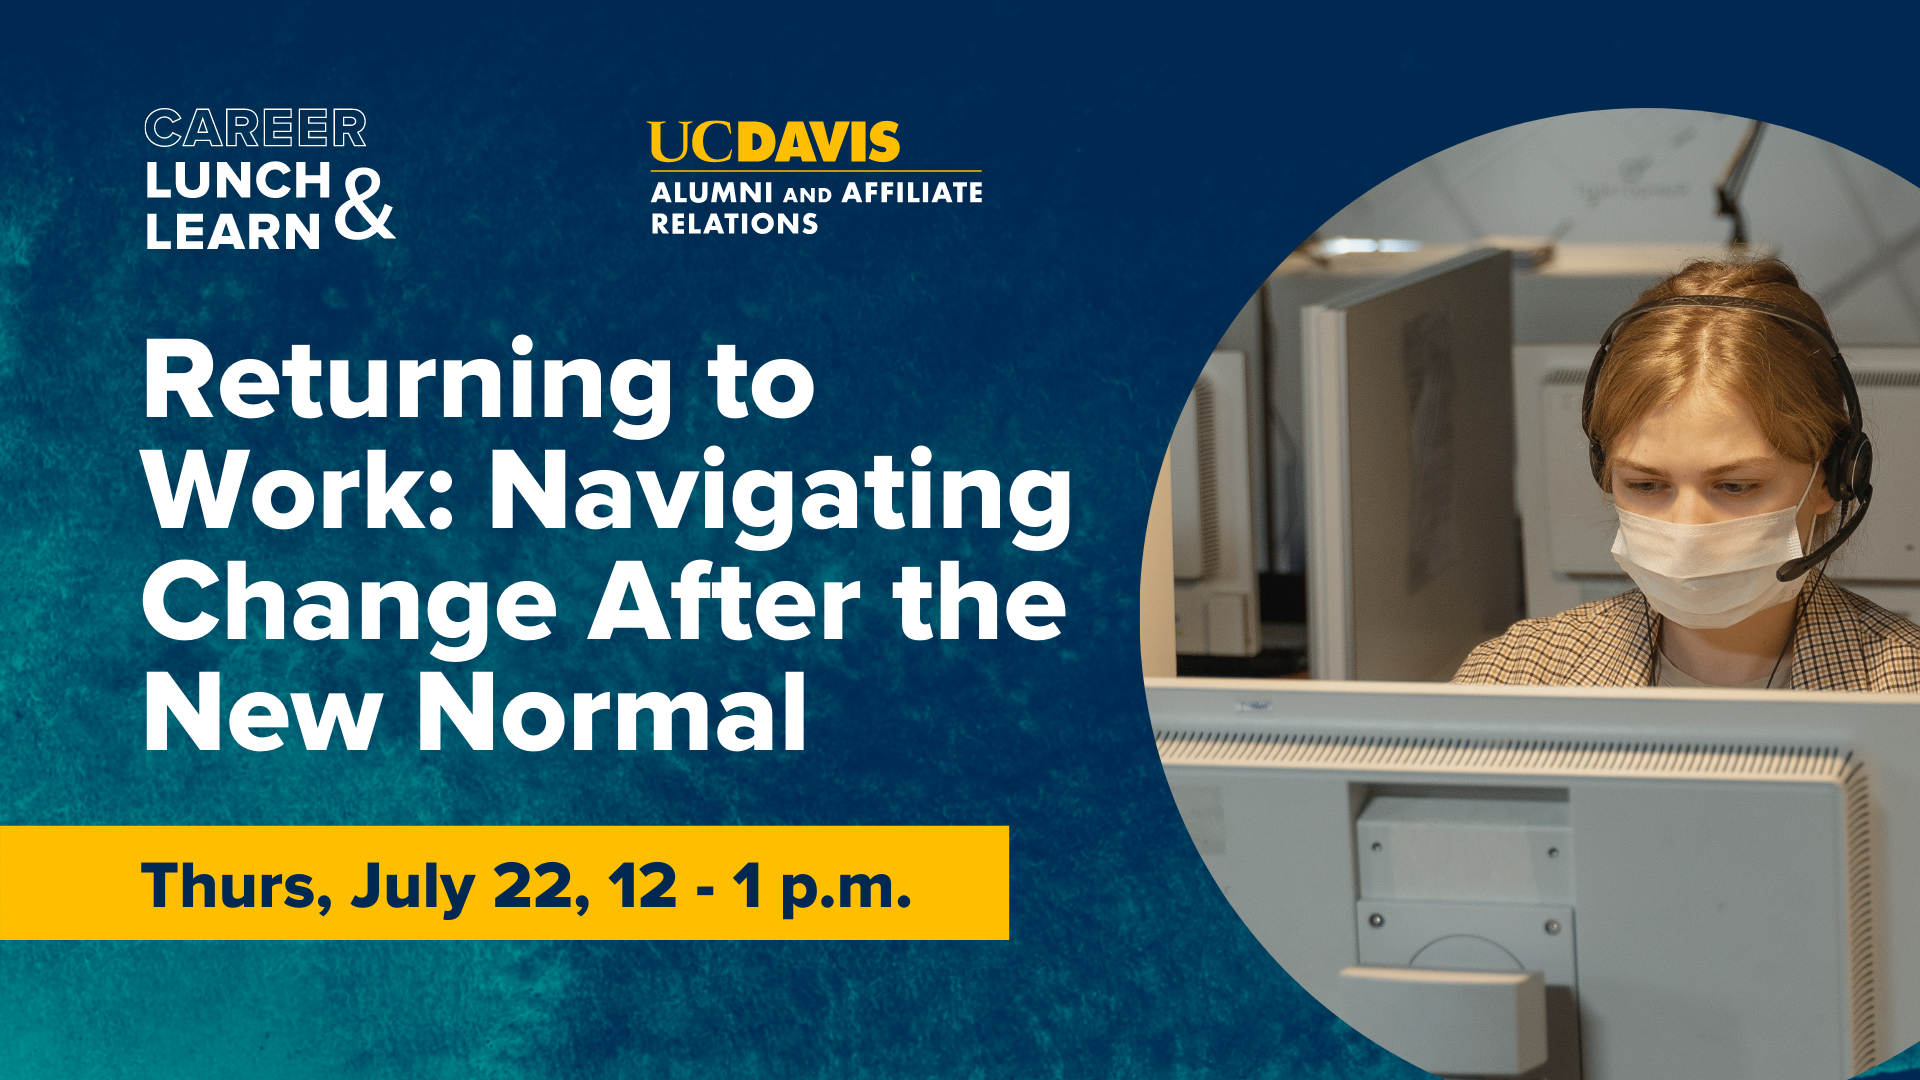 Photo of employee wearing a mask. Text reads: Career Lunch & Learn, UC Davis Alumni and Affiliate Relations, Returning to Work: Navigating Change After the New Normal, Thurs, July 22, 12-1 p.m.